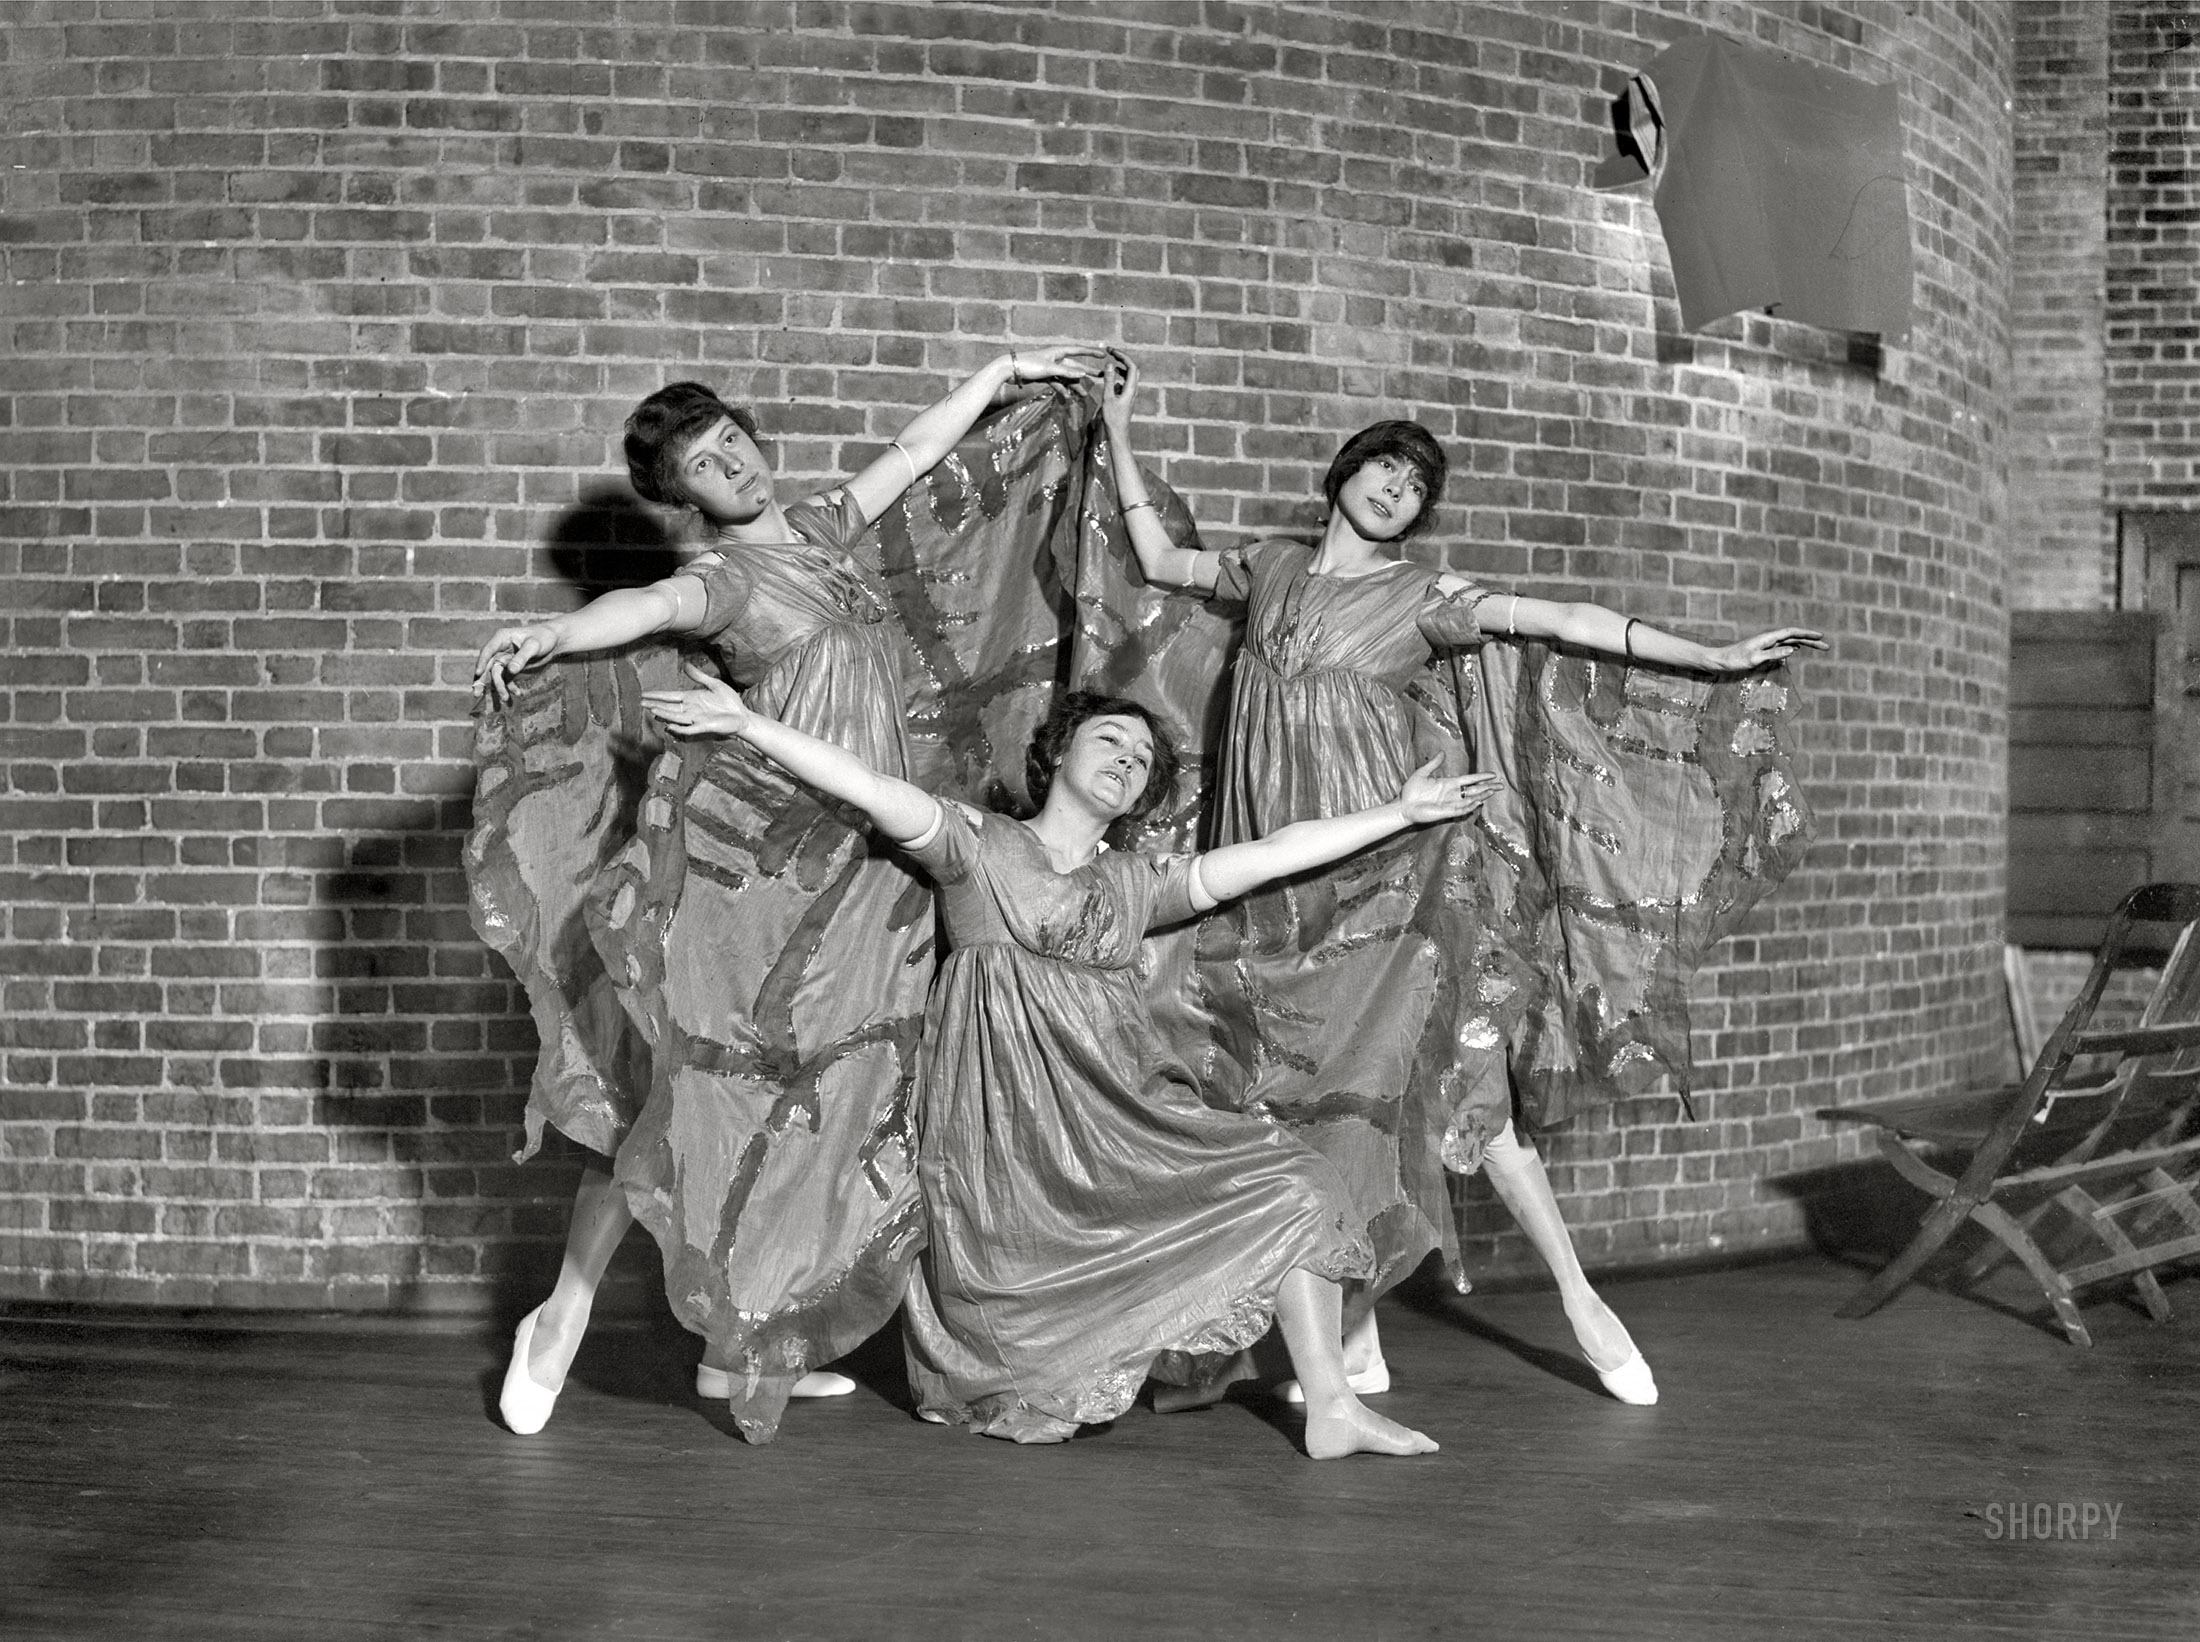 January 31, 1914. New York. "Golden Butterfly Dance -- Women's Political Union Suffrage Ball, 71st Regiment Armory." 5x7 glass negative, Bain News Service. View full size.